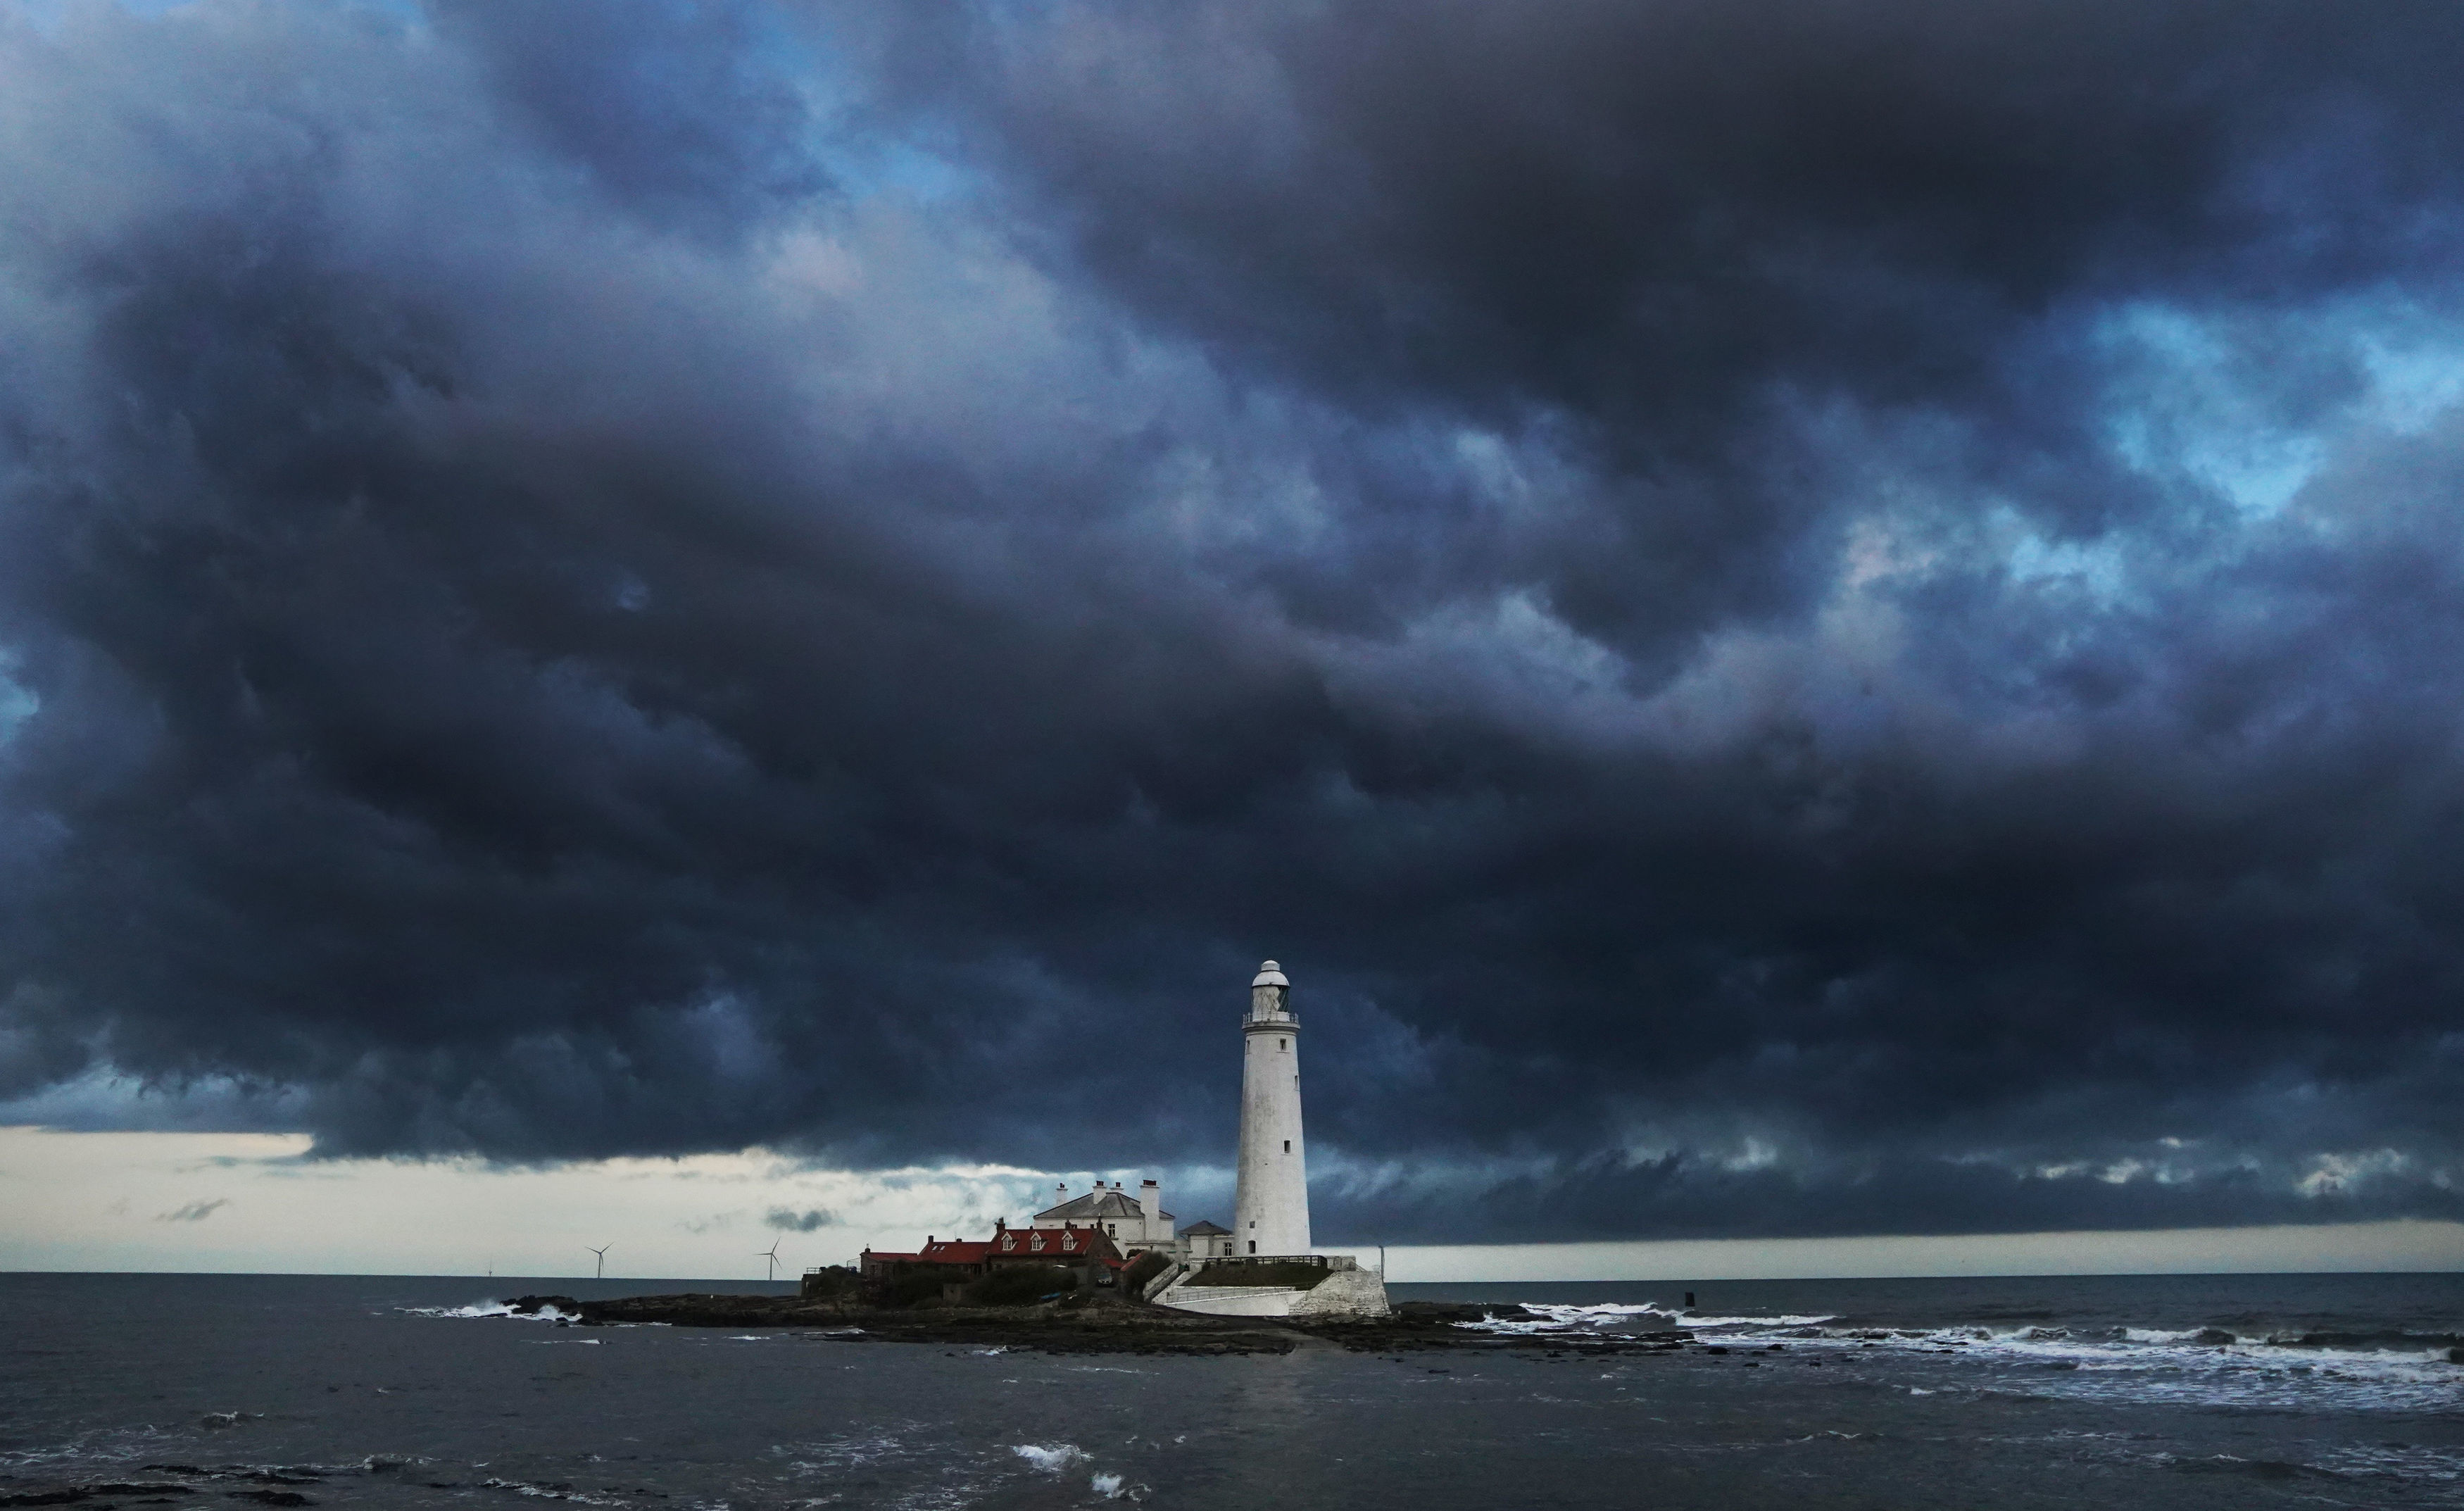 Clouds over St Marys Lighthouse in Whitley Bay. Weather forecasters have warned of gusts of up to 80mph and low temperatures this weekend, with Storm Hannah expected to hit the UK.